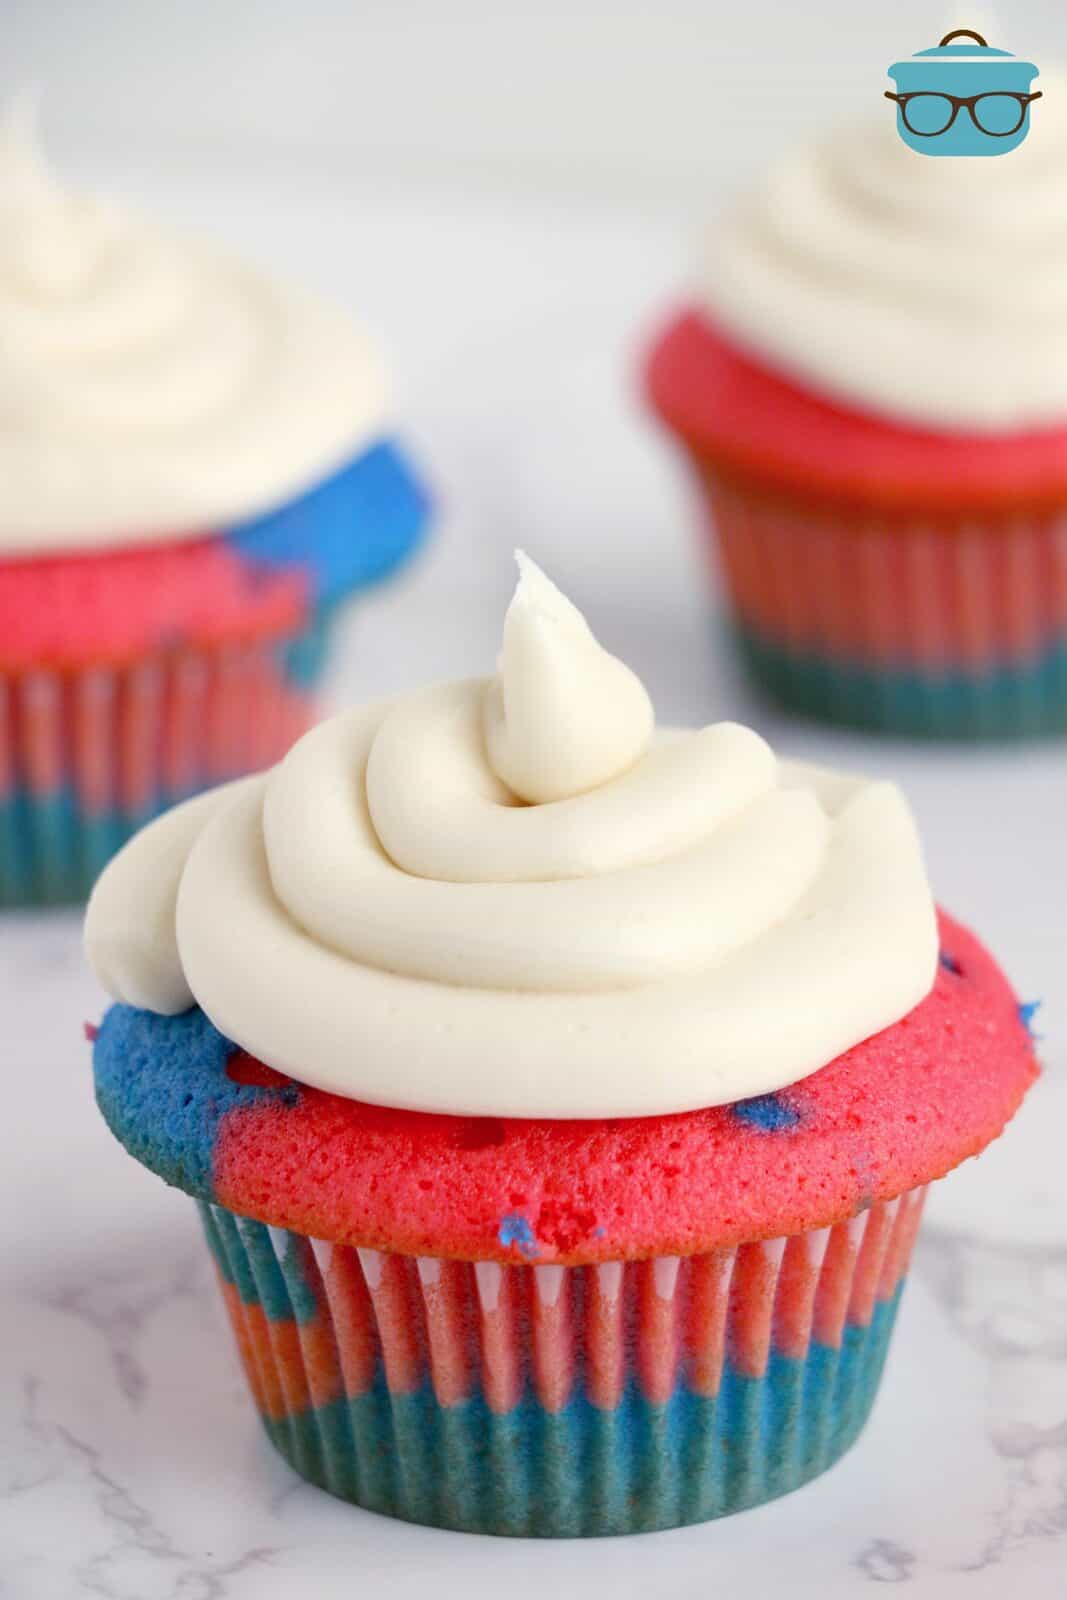 Frosting put on the Red, White and Blue Cupcakes.